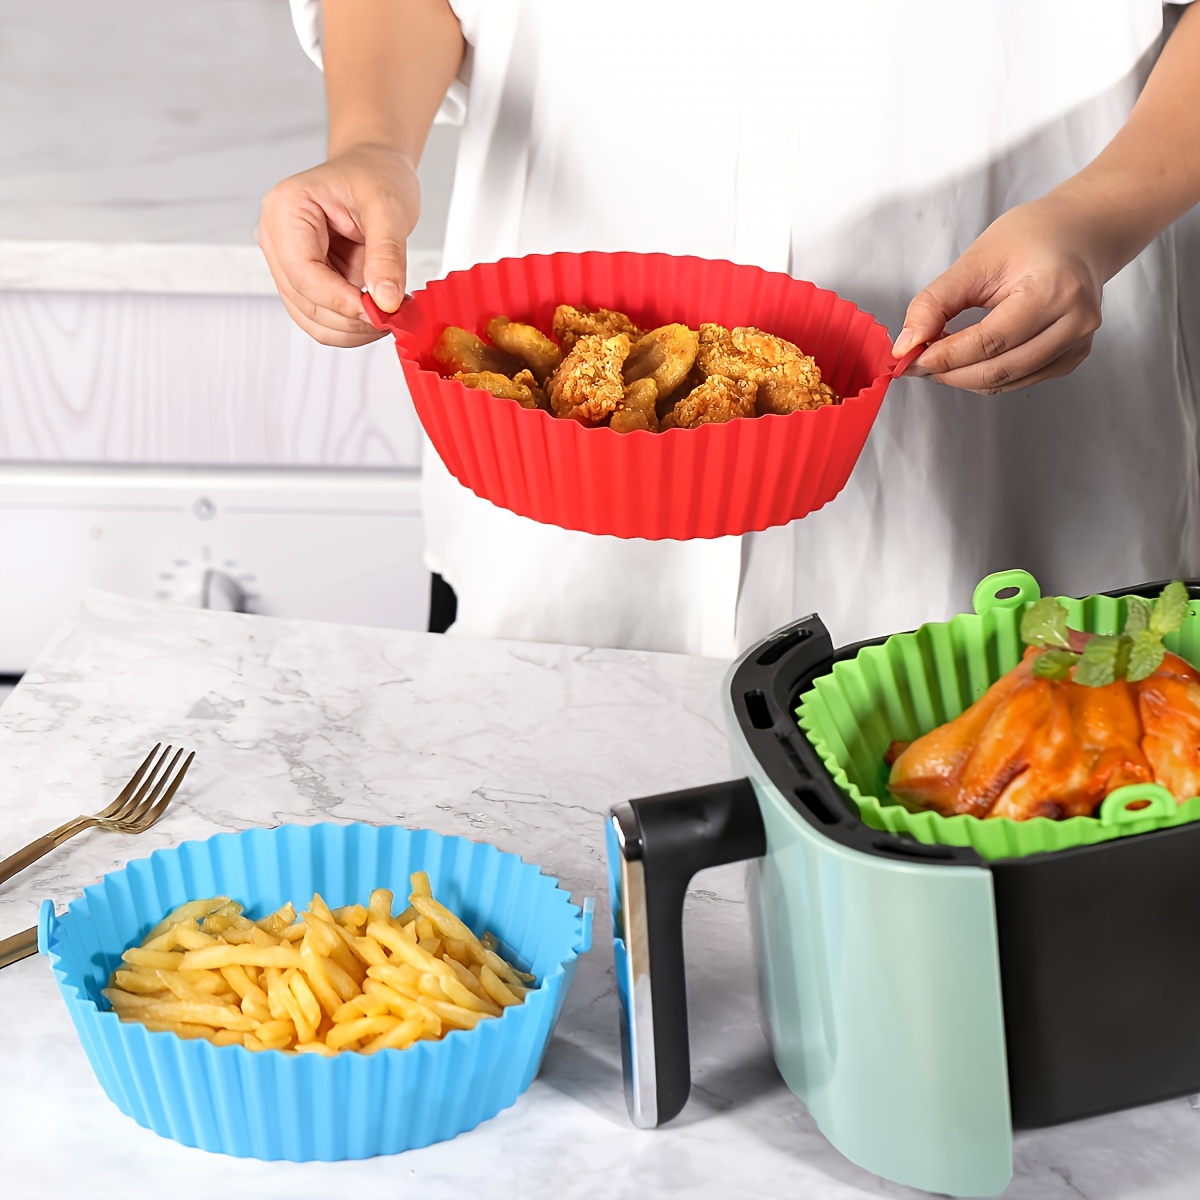 Square Silicone Air Fryer Liners - 9 Inch Reusable Air Fryer Pot - Air  Fryer Accessories - Air Fryer Inserts for 6 to 9 QT for Oven Microwave